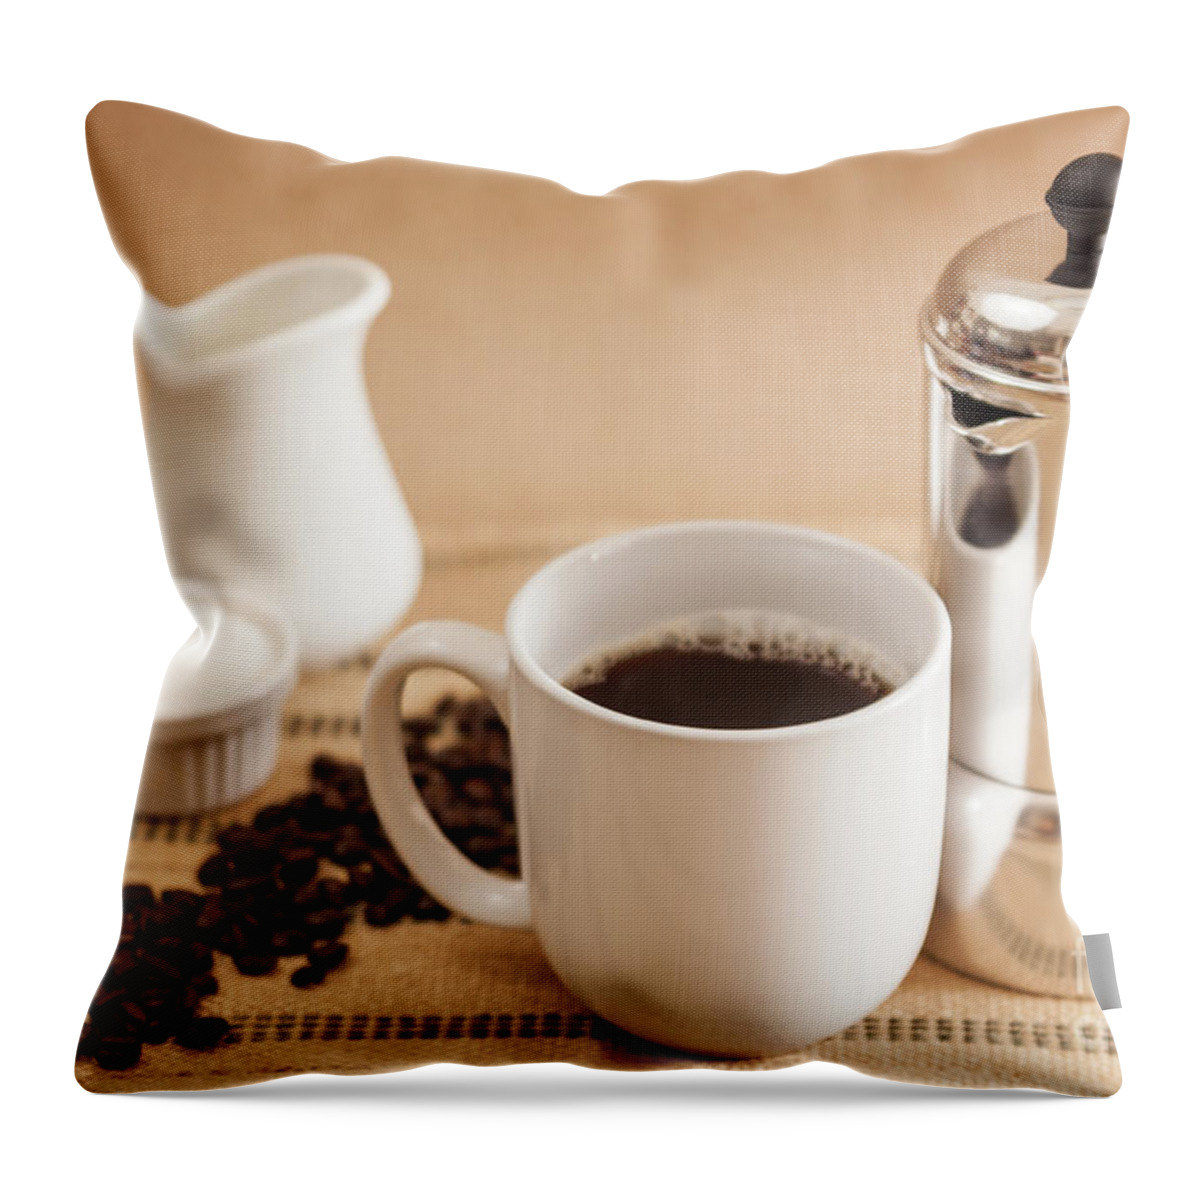 Coffee Throw Pillow featuring the photograph Mmm Coffee by Ana V Ramirez